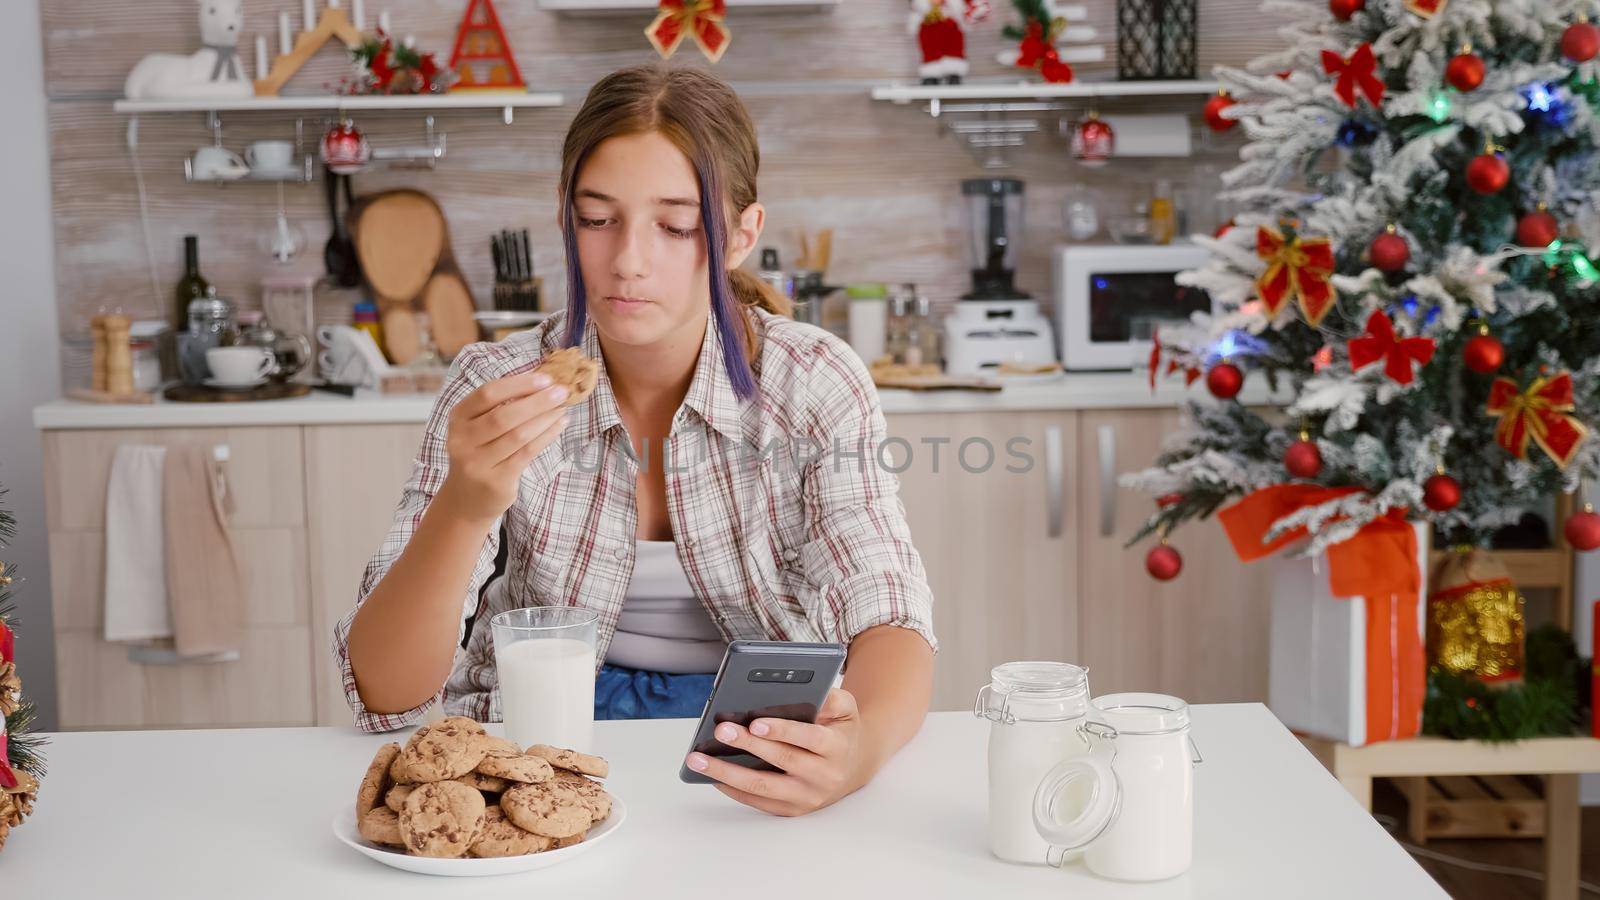 Happy girl enjoying winter holiday sitting at table in xmas decorated kitchen browsing on smartphone watching festive video using phone. Girl celebrating christmas season eating baked cookies